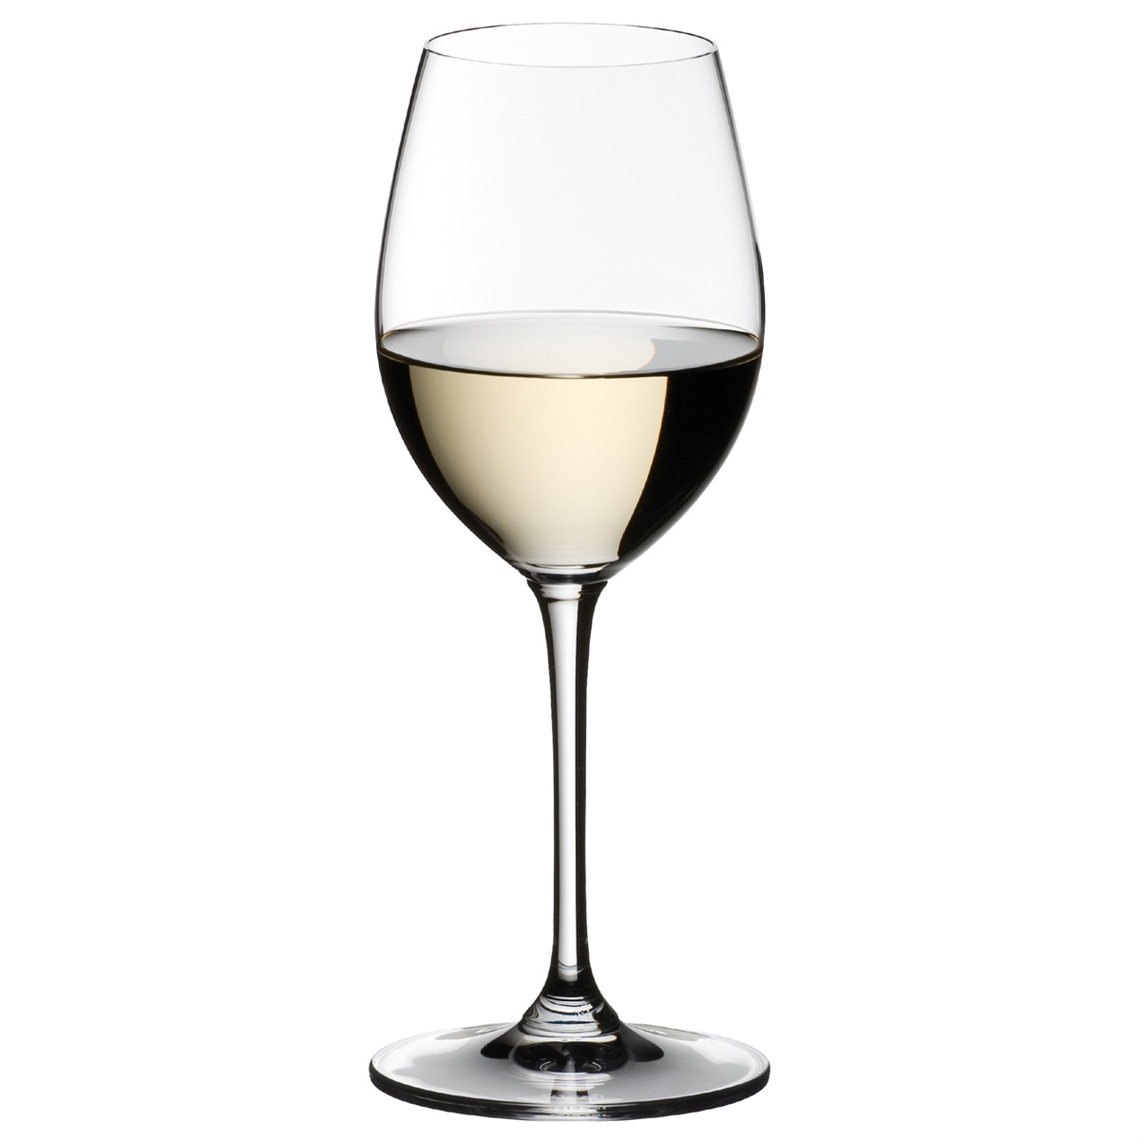 View more whisky glasses from our Dessert Wine Glasses range